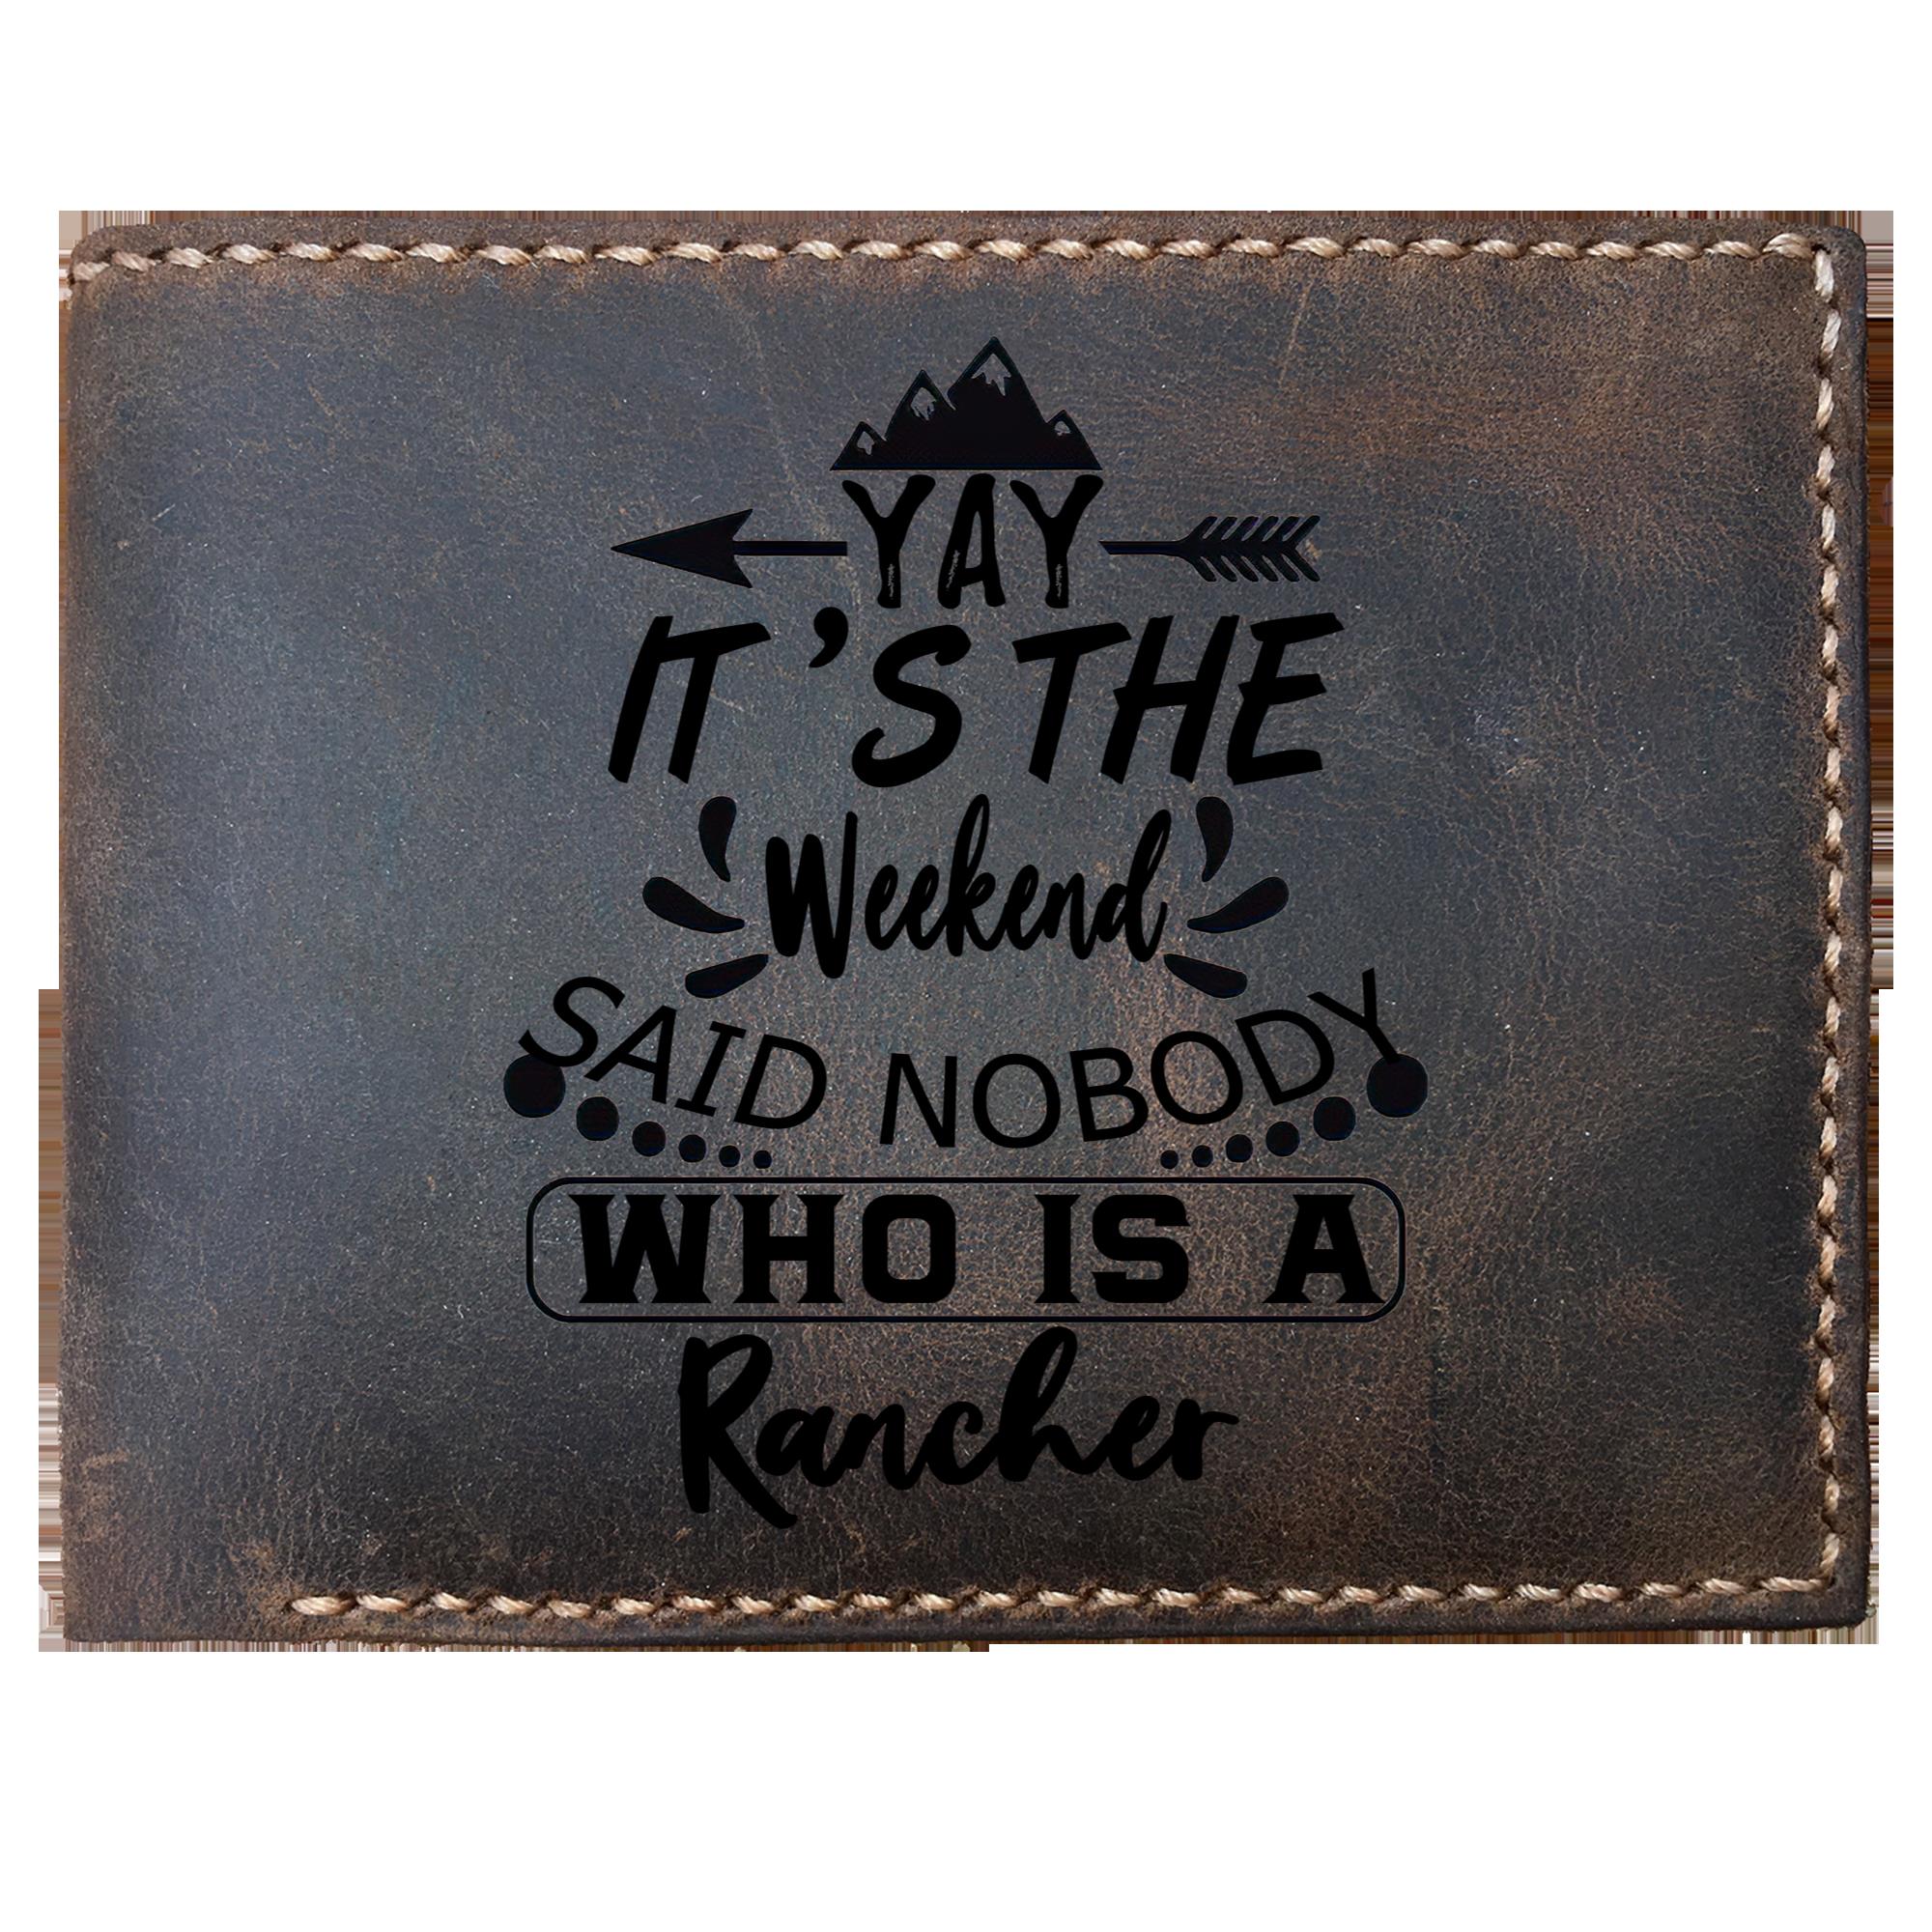 Skitongifts Funny Custom Laser Engraved Bifold Leather Wallet For Men, It's The Weekend Said Nobody Who Is A Rancher, Father's Day Gifts